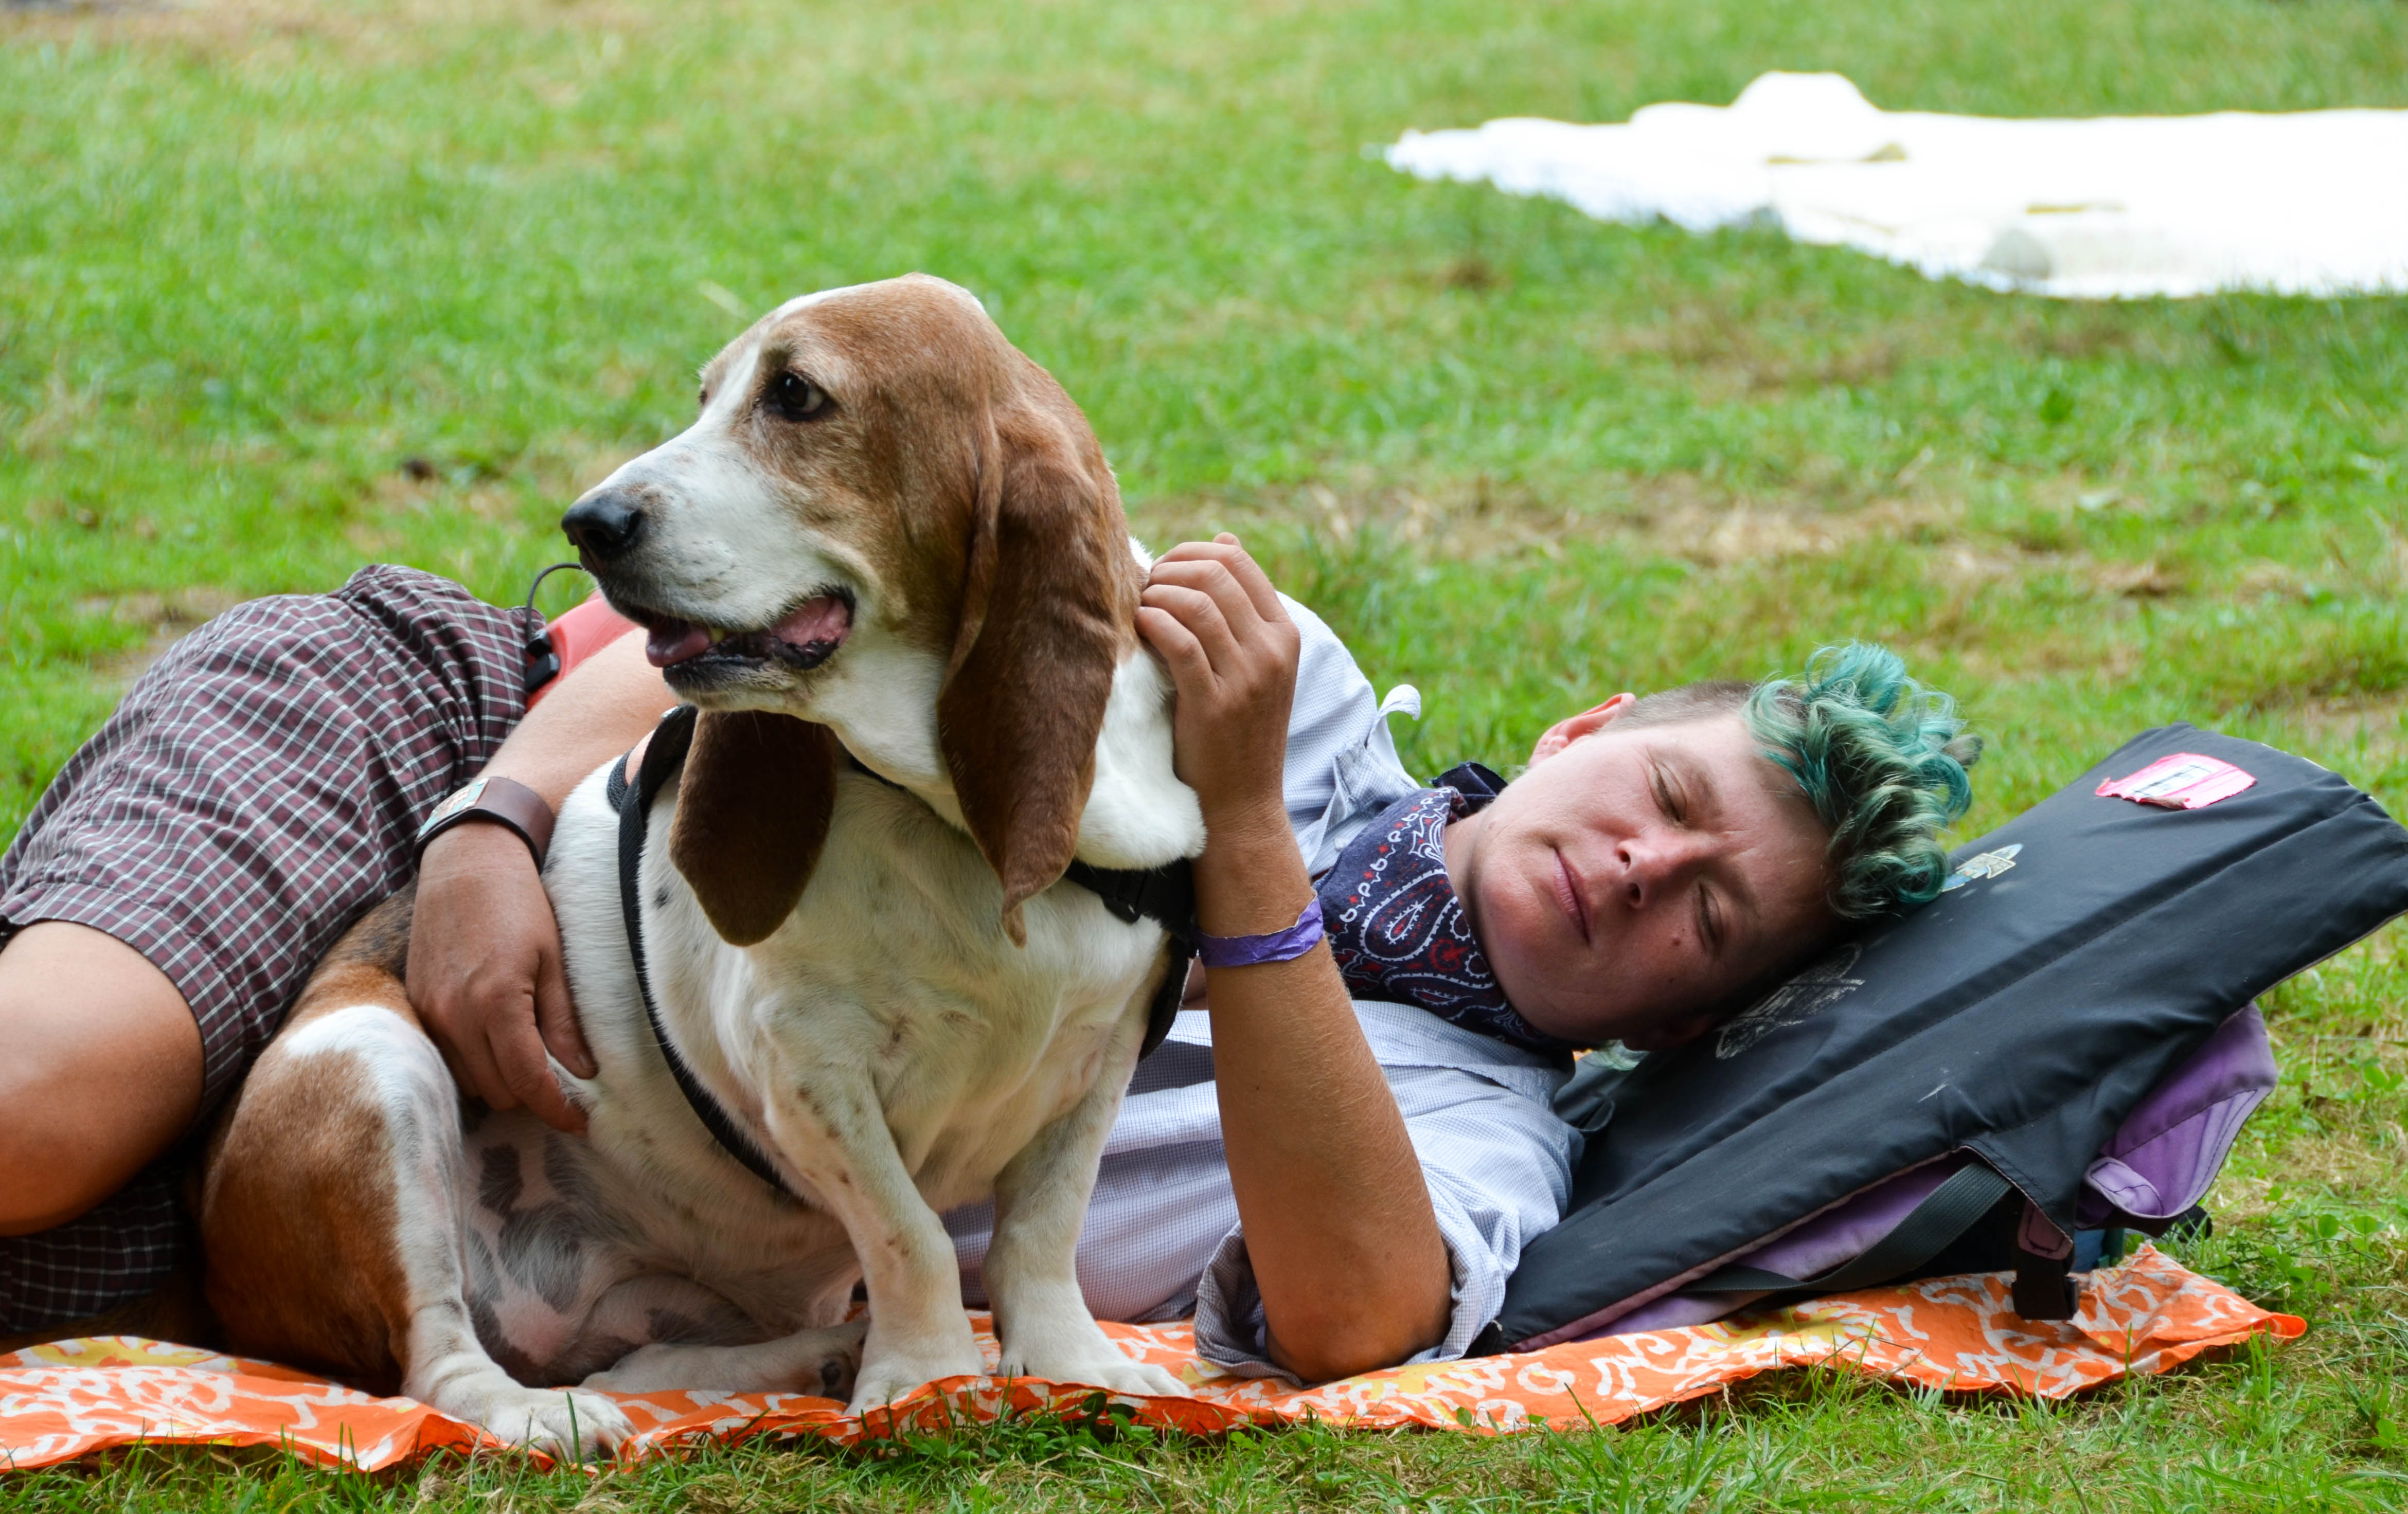 Festival goer rests with her pal.